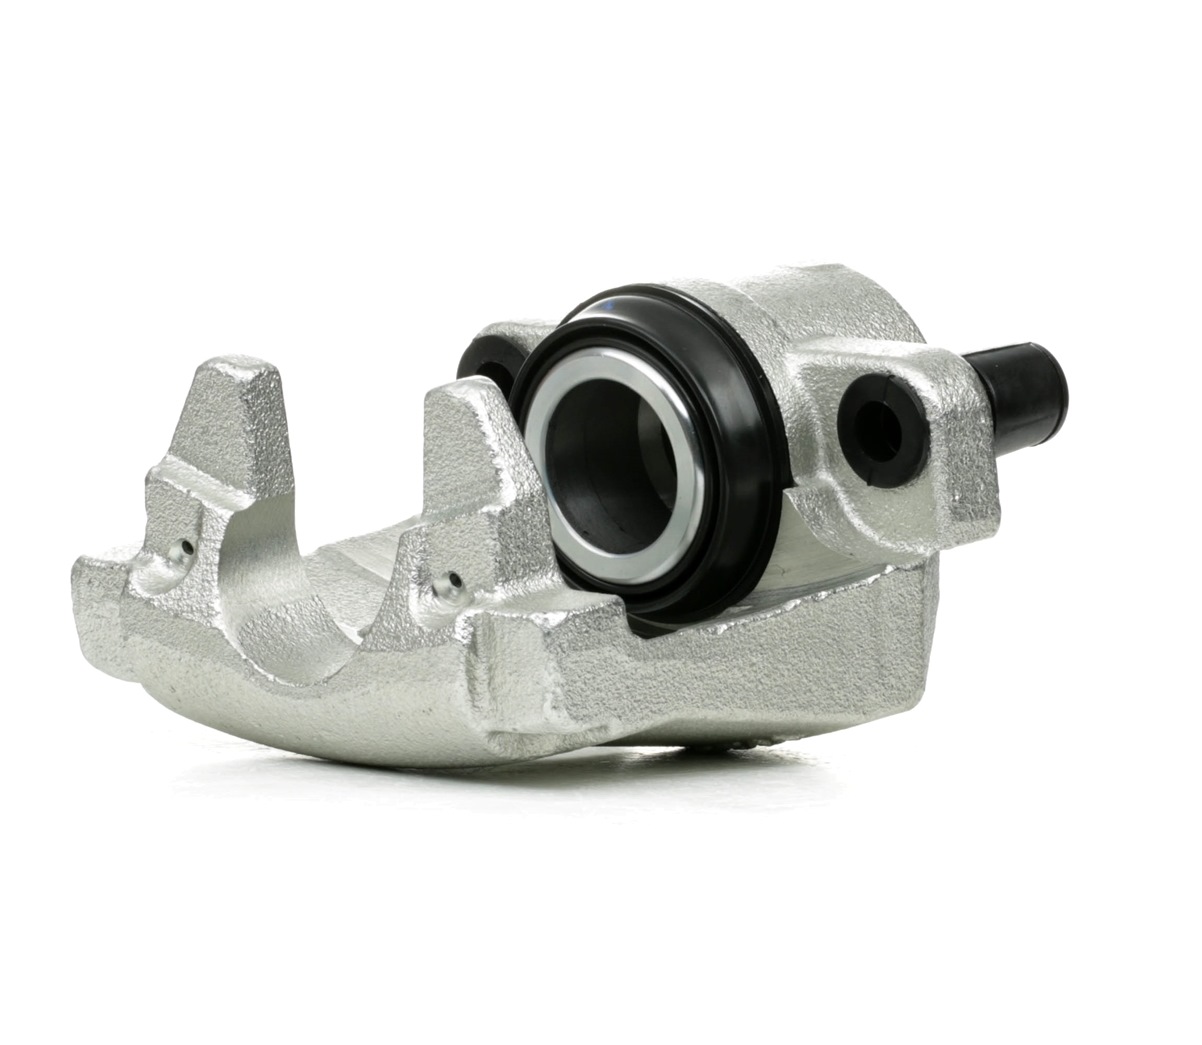 STARK SKBC-0460433 Brake caliper Cast Iron, 94mm, Rear Axle Left, in front of axle, without holder